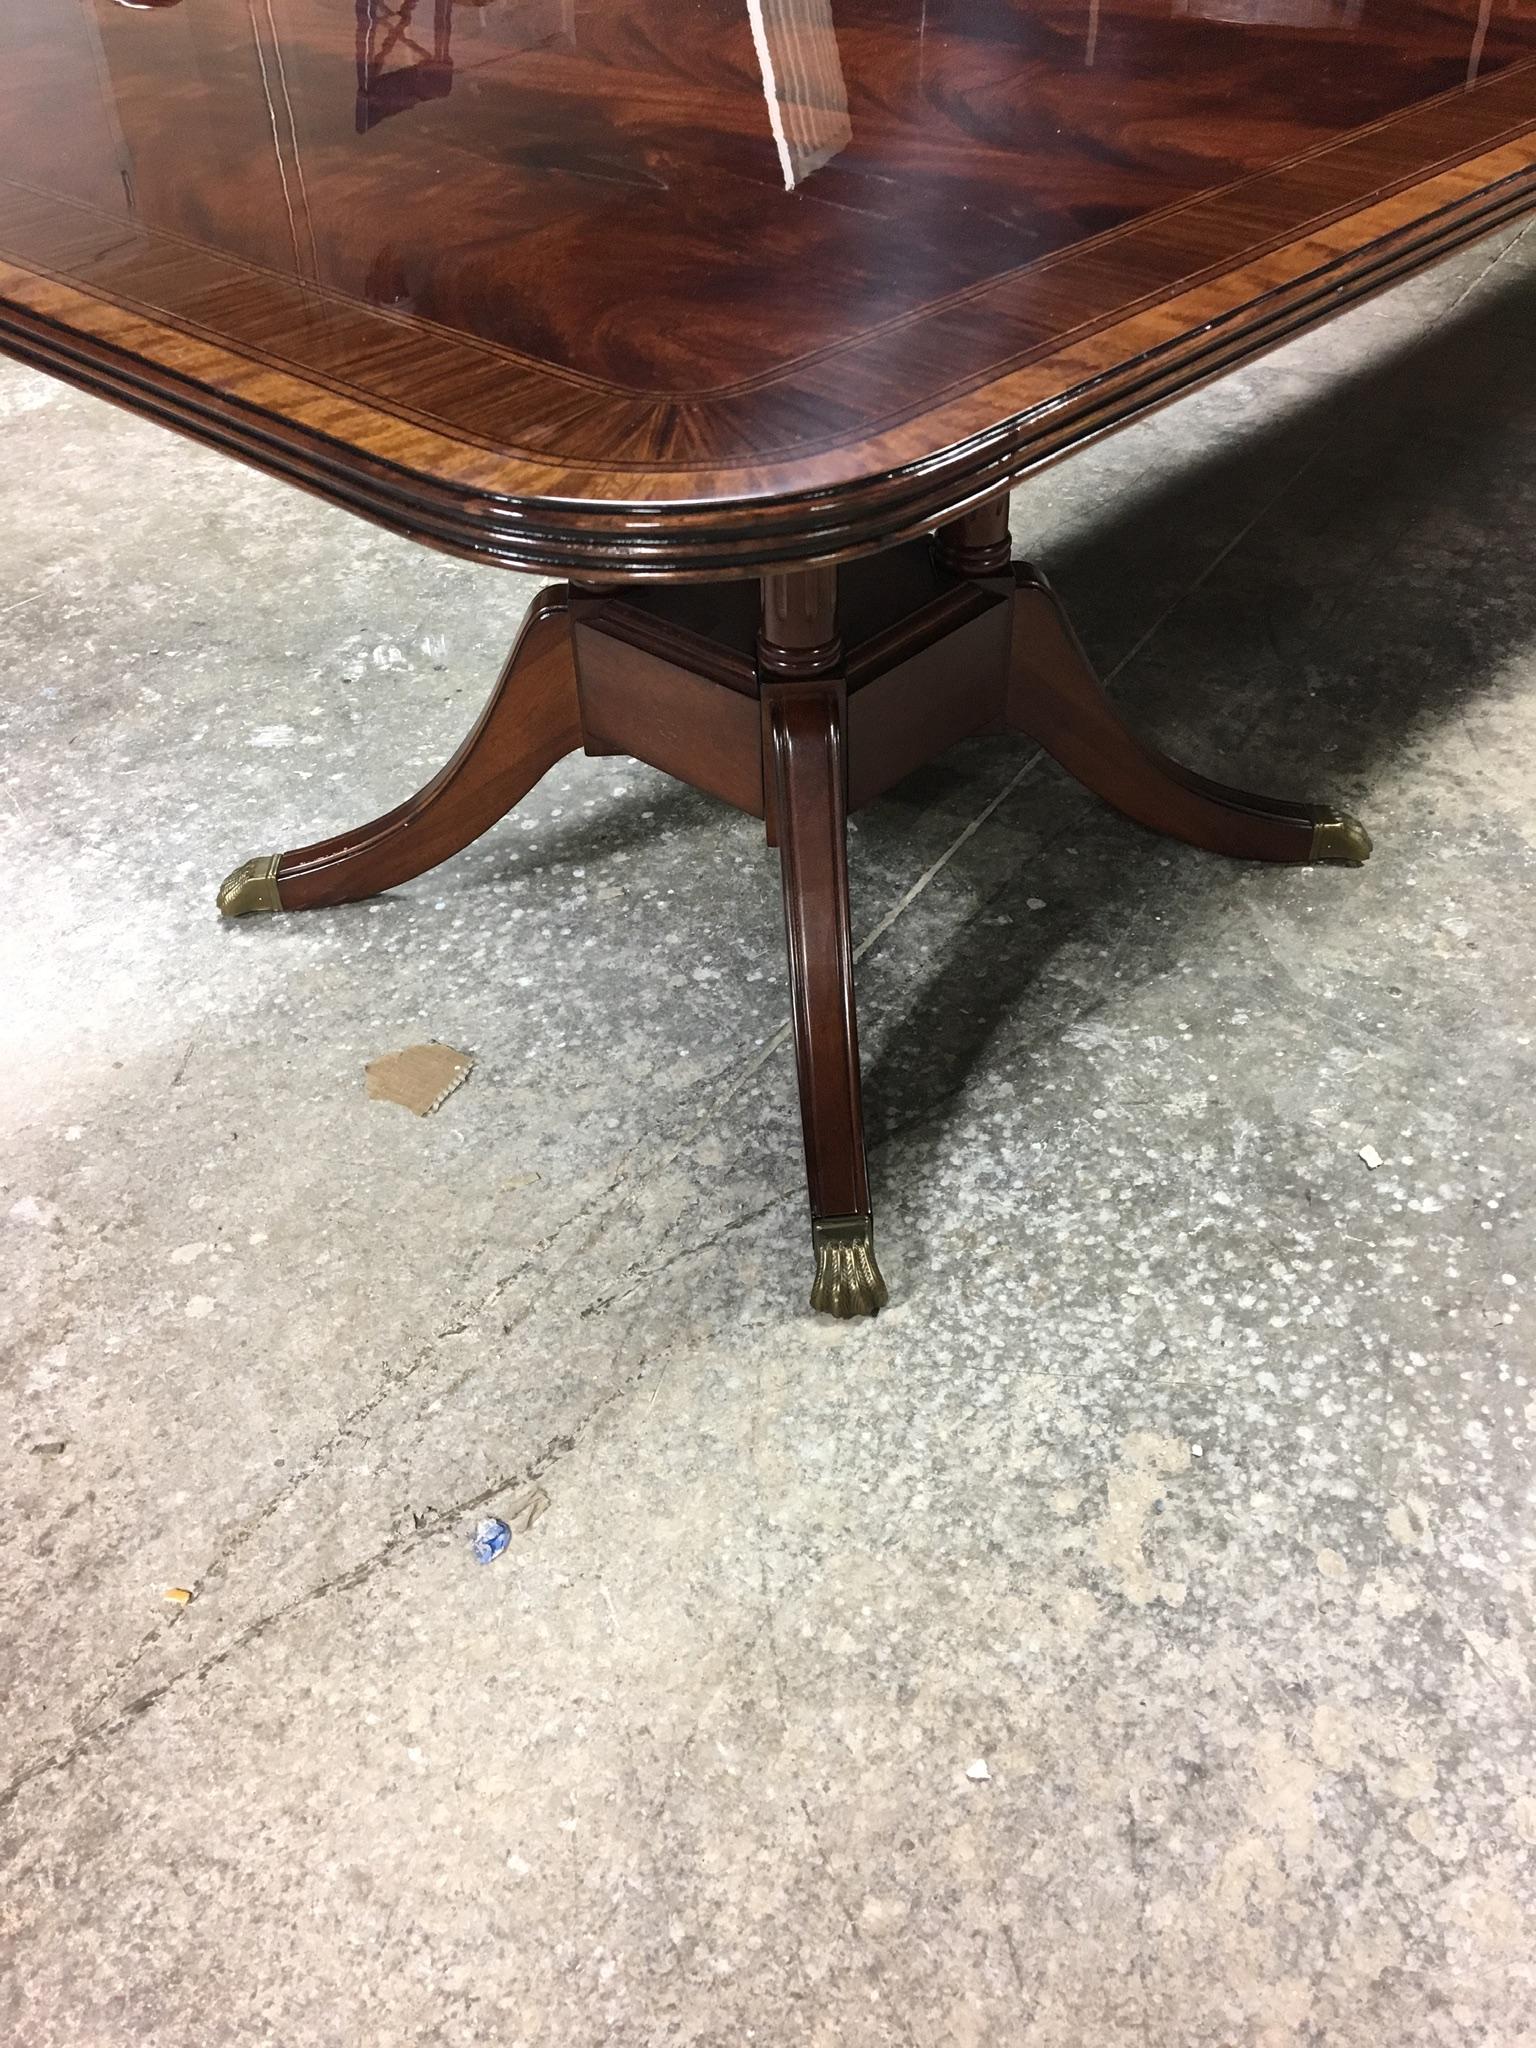 Multi-Banded 14 Ft. Mahogany Regency Style Dining Table by Leighton Hall In New Condition For Sale In Suwanee, GA